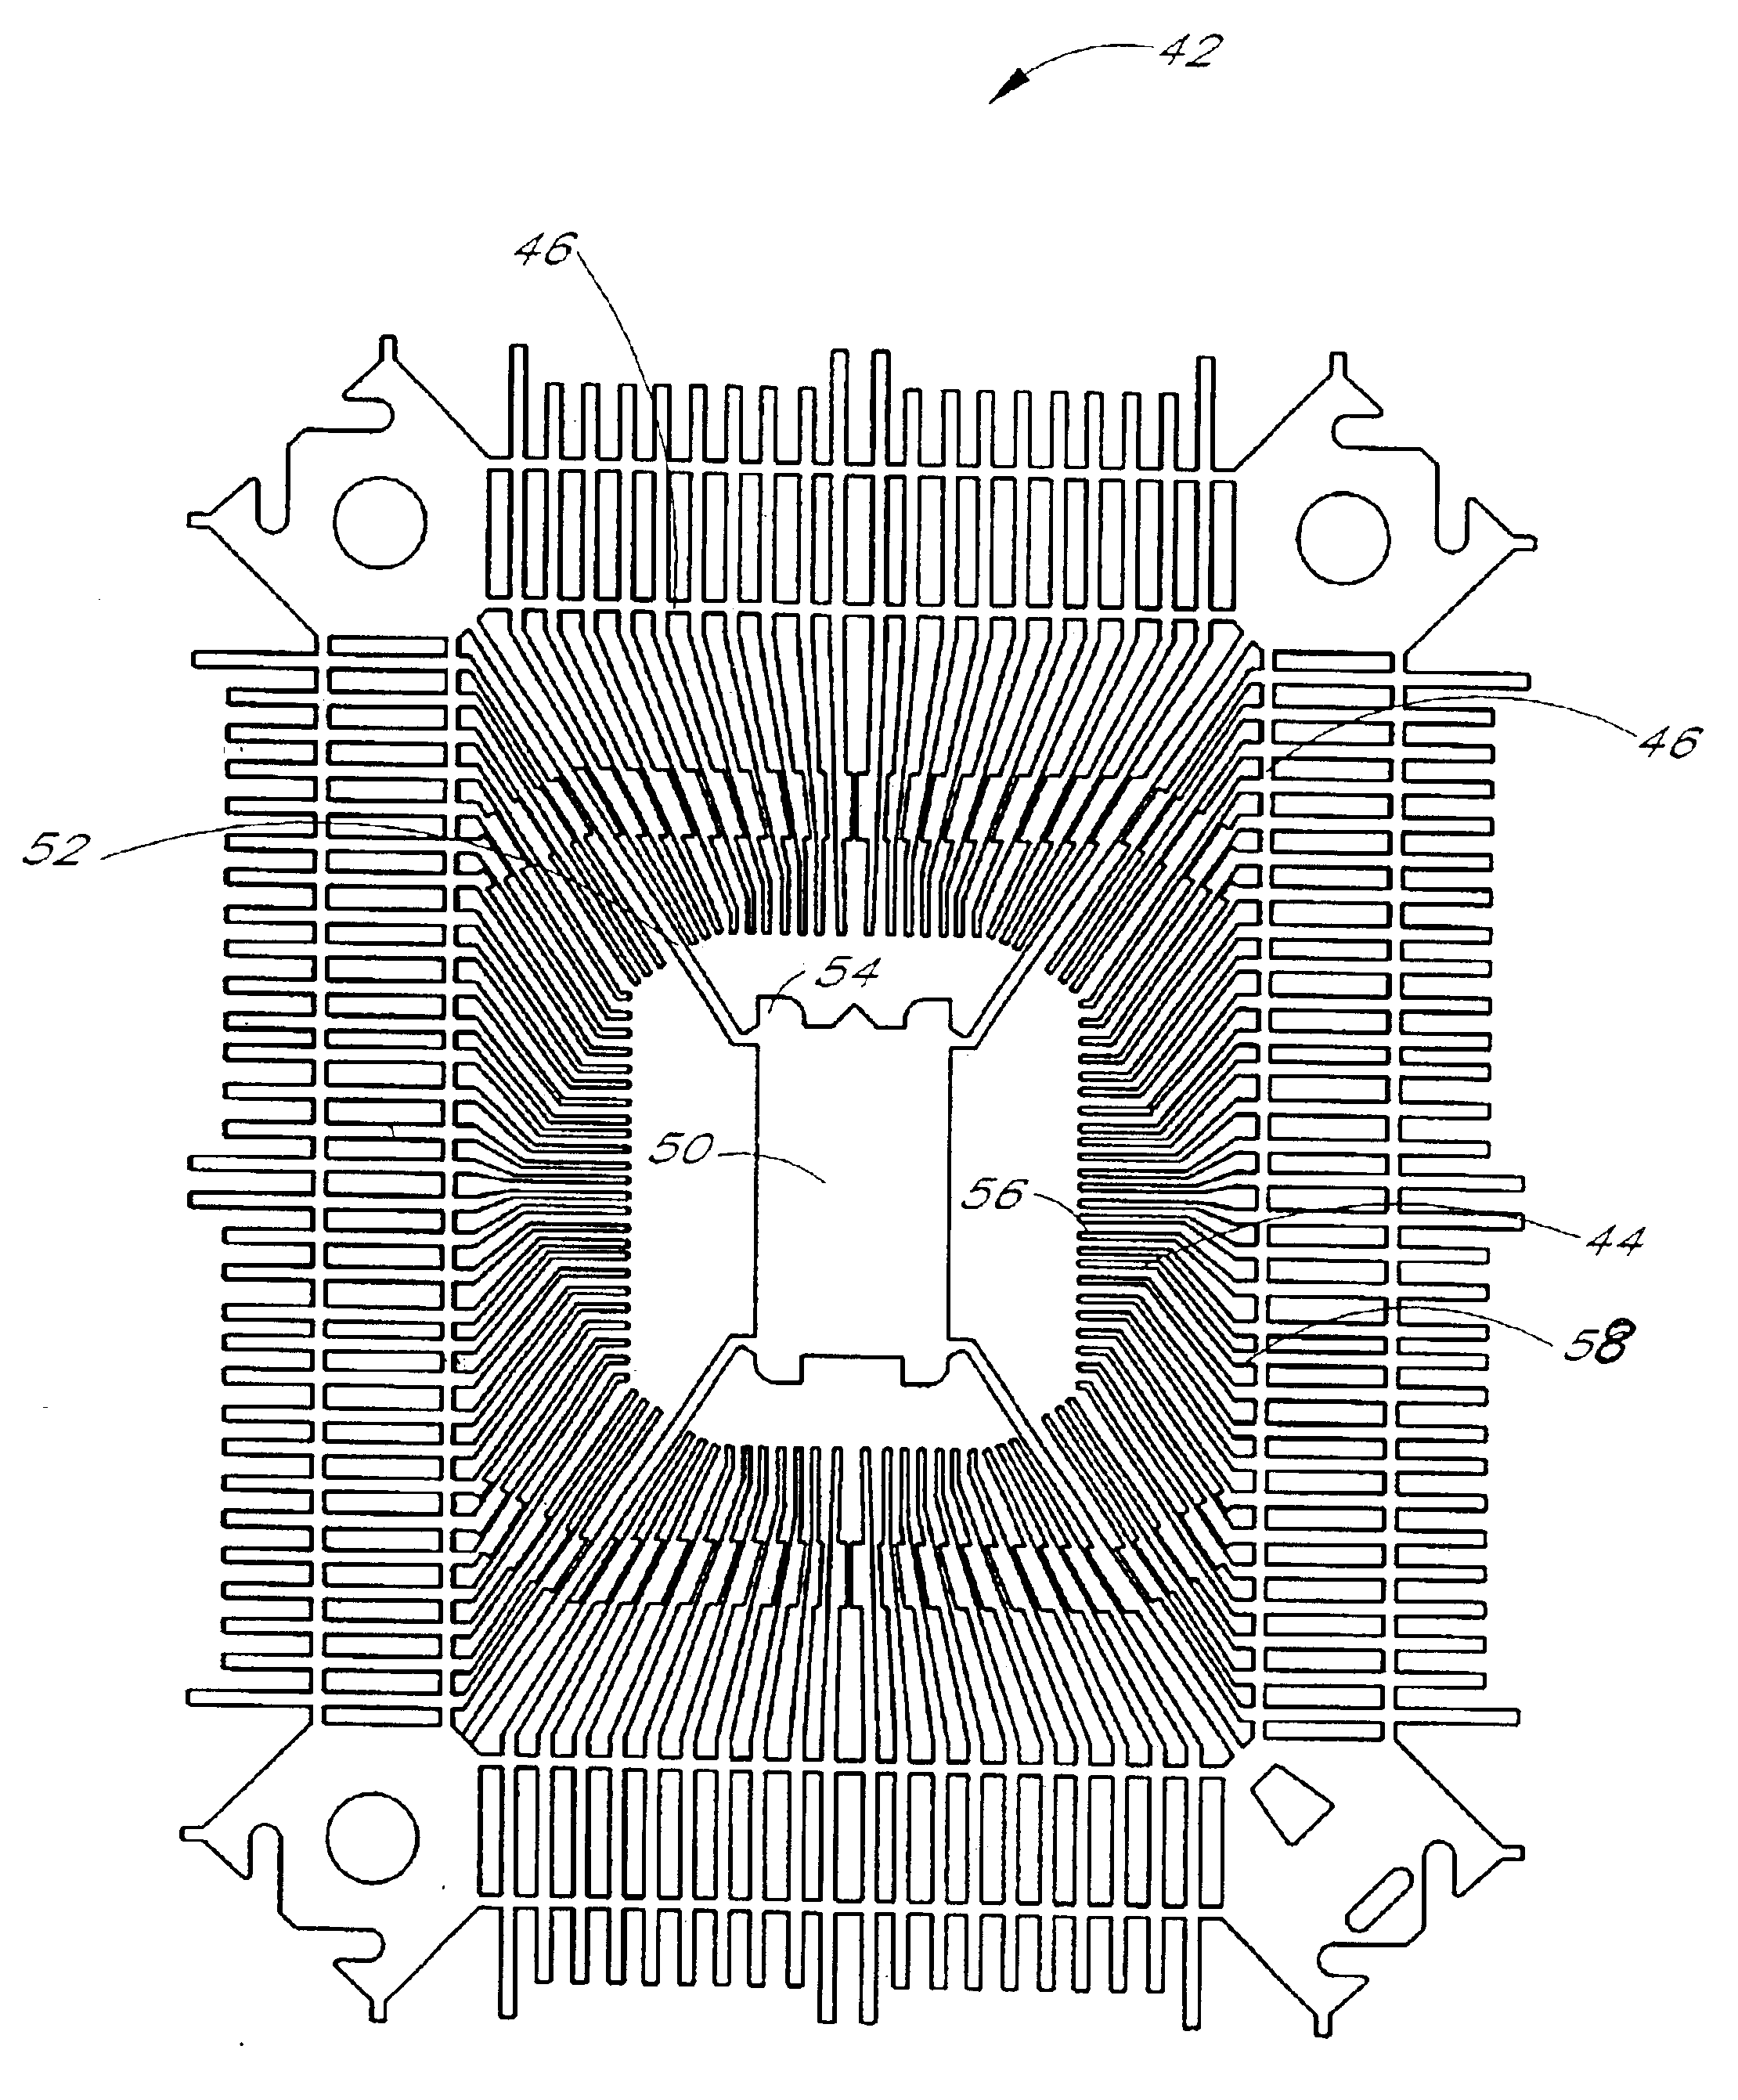 Alignment and orientation features for a semiconductor package